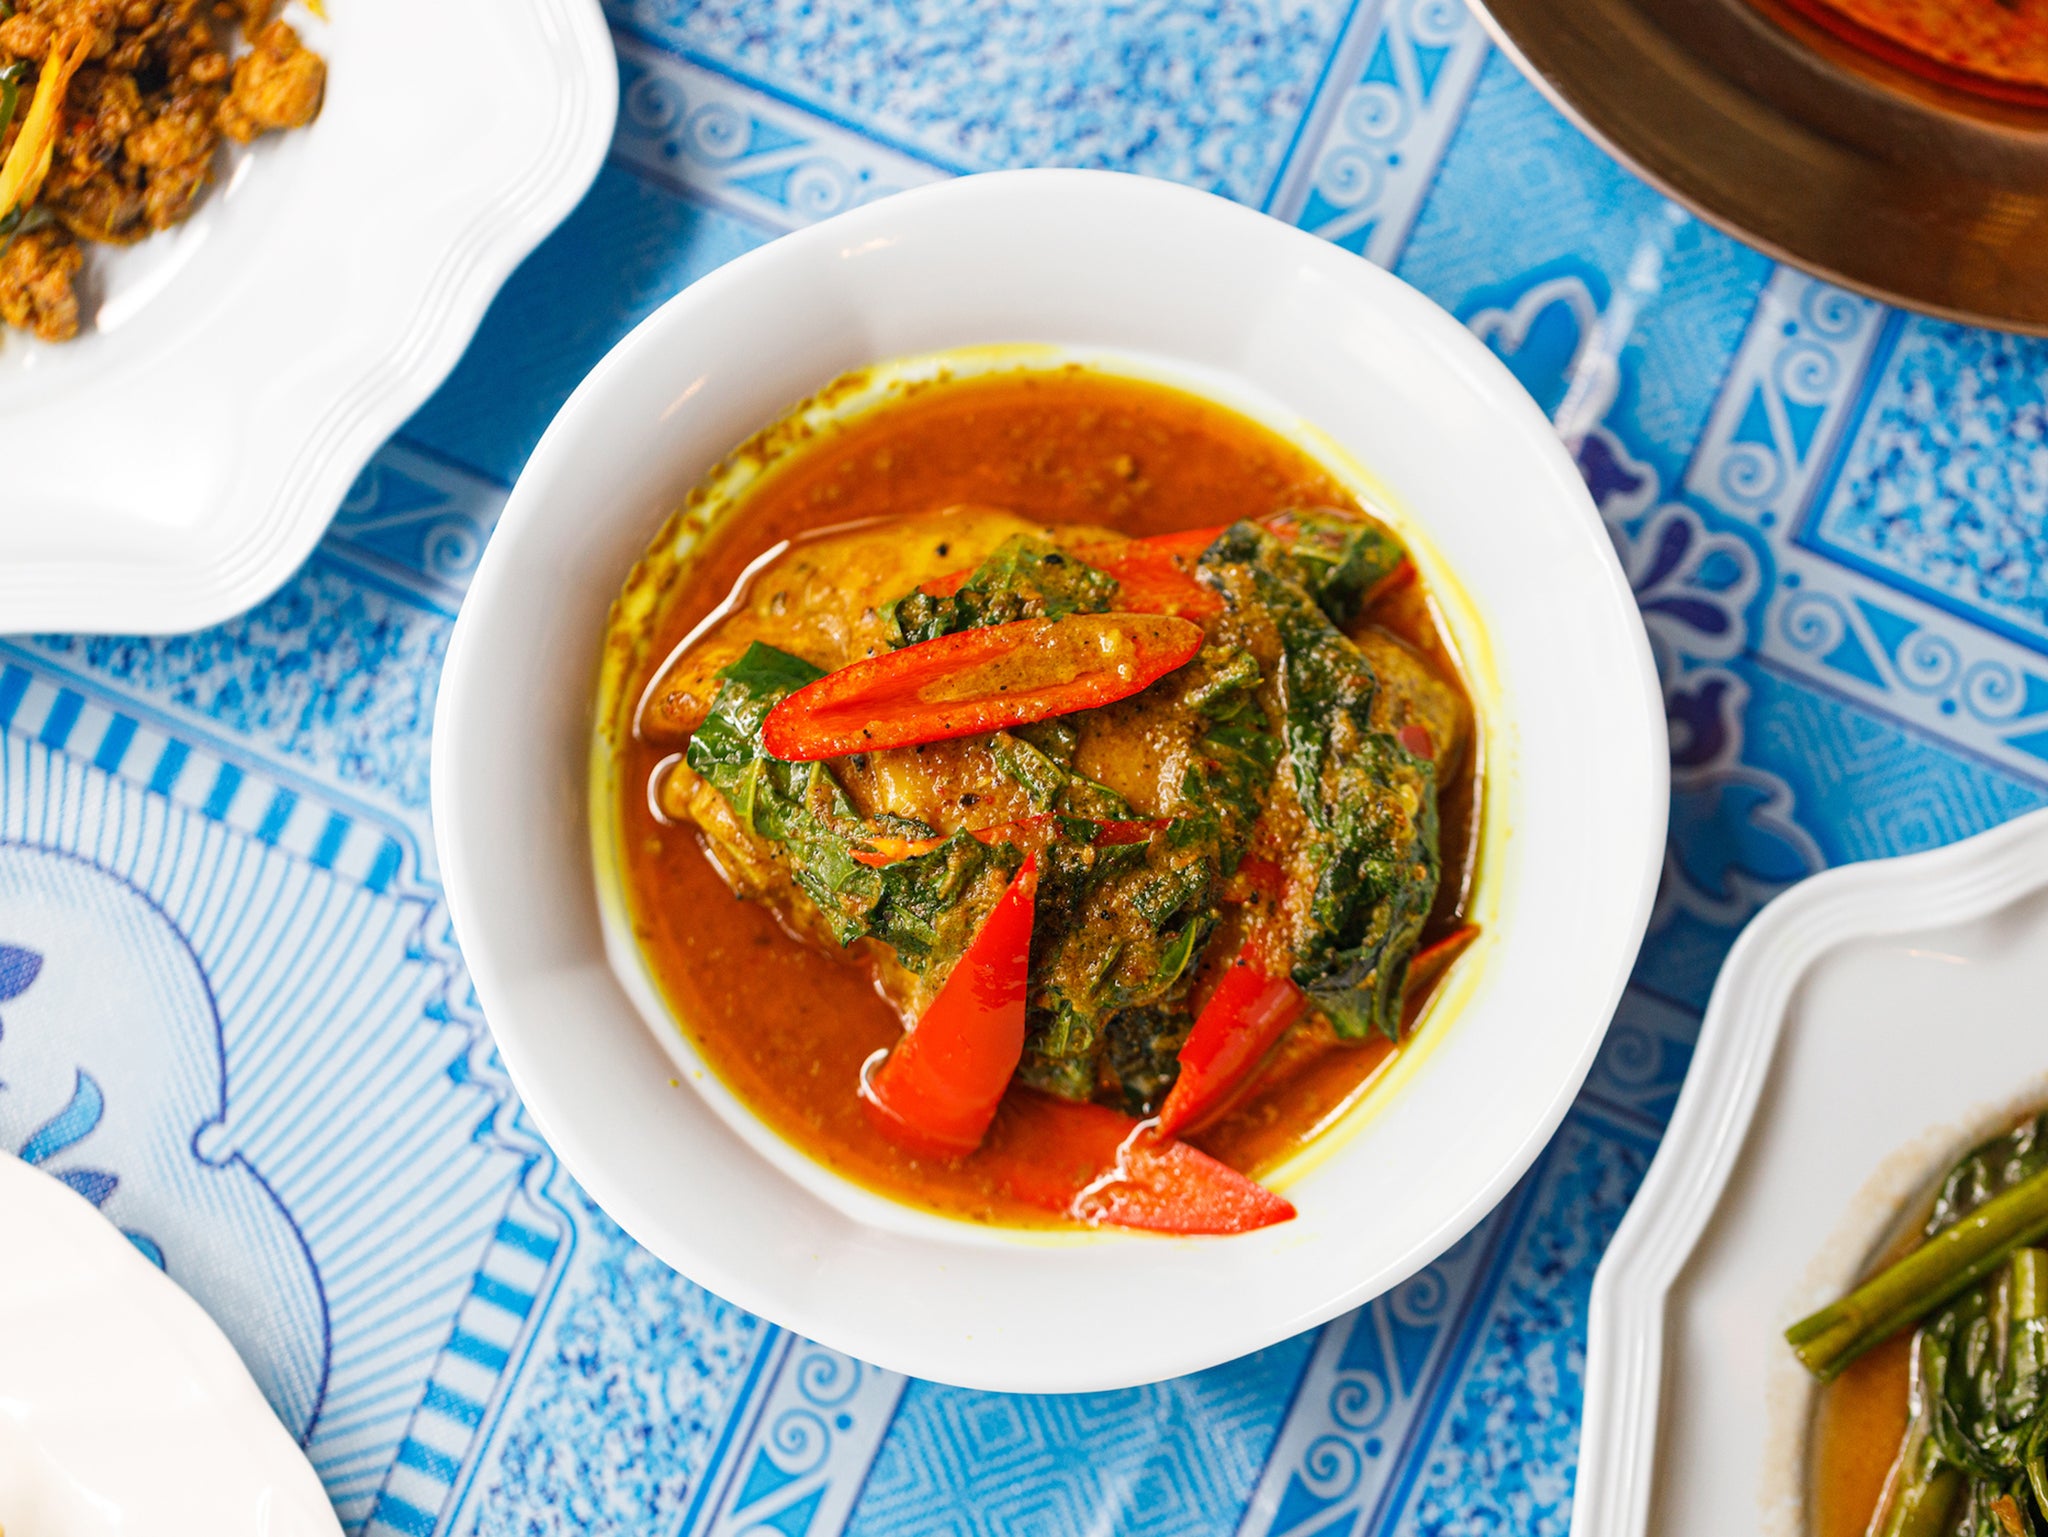 Southern Thai curries like this chicken version are a delight of spicy curry pastes and interesting herbs